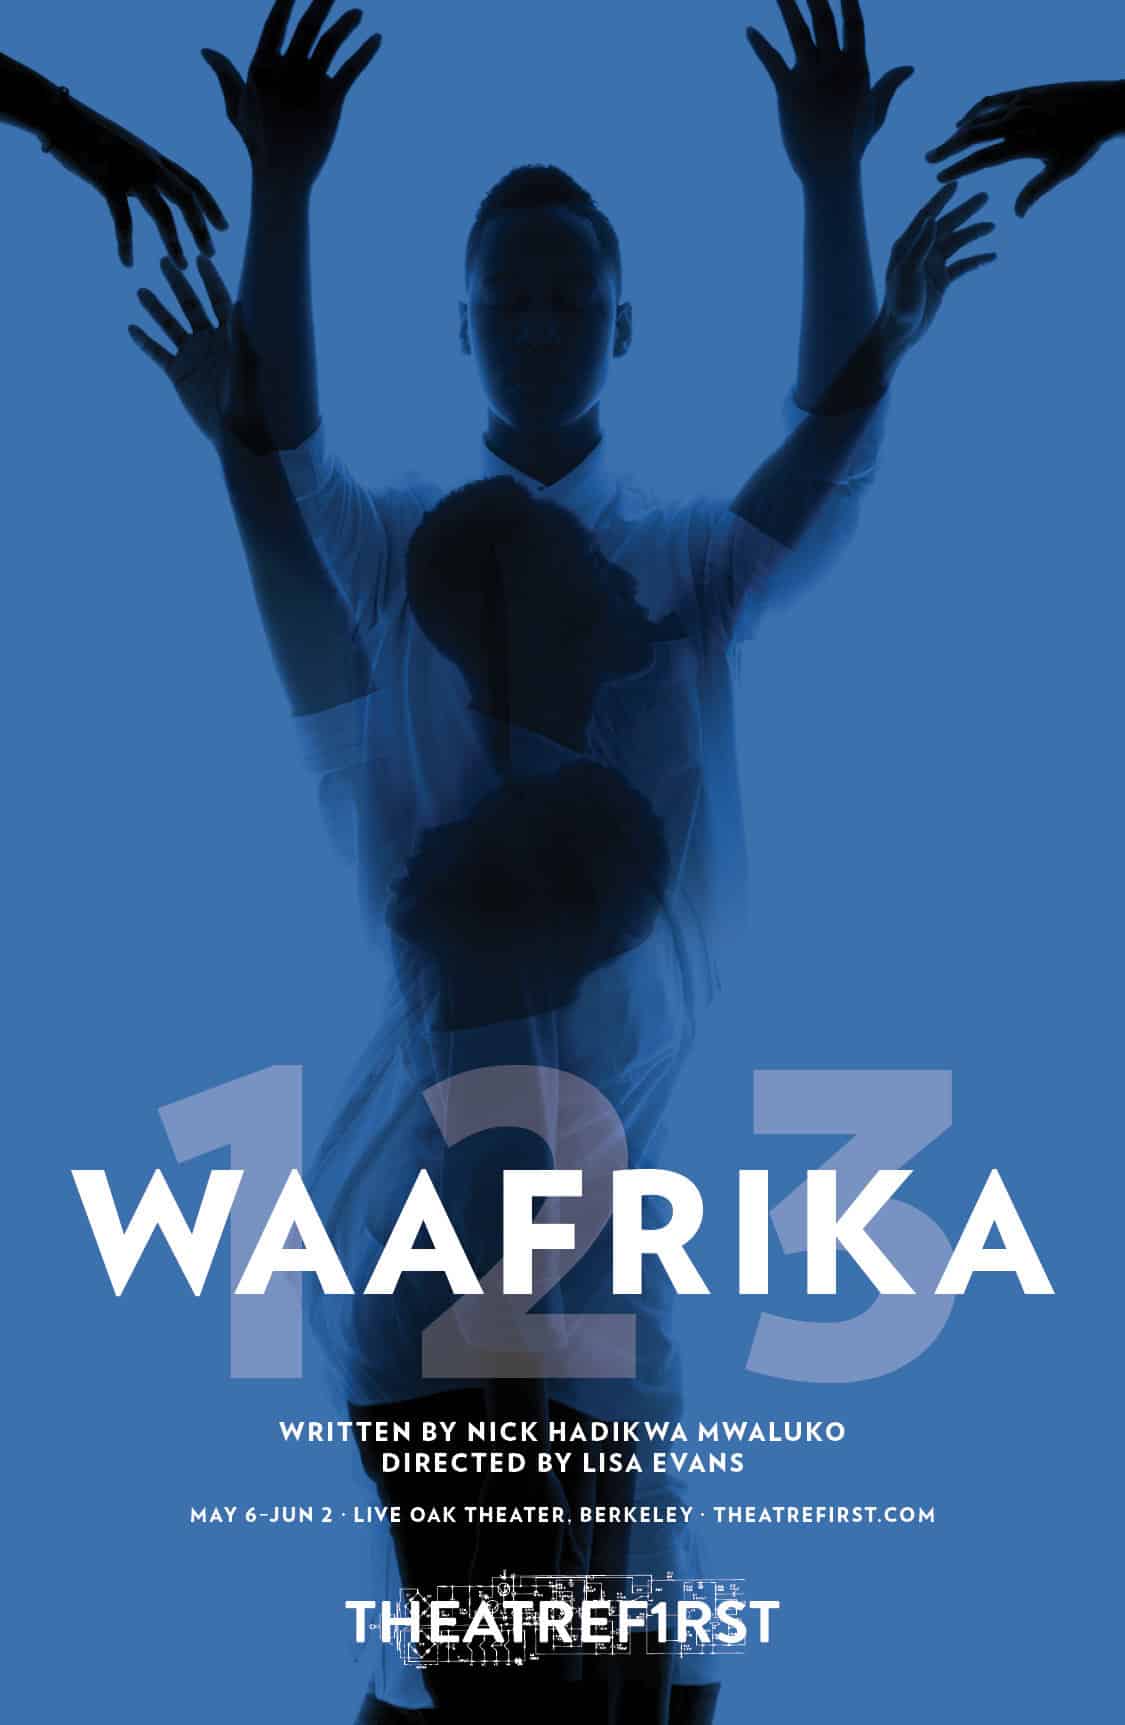 Poster for the play "Waafrika 123" at TheatreFIRST. The poster is a blue background with a triple exposure of the protagonist in silhouette, reaching up his hands in different directions. From each of the top corners another hand reaches out to those of the protagonist.